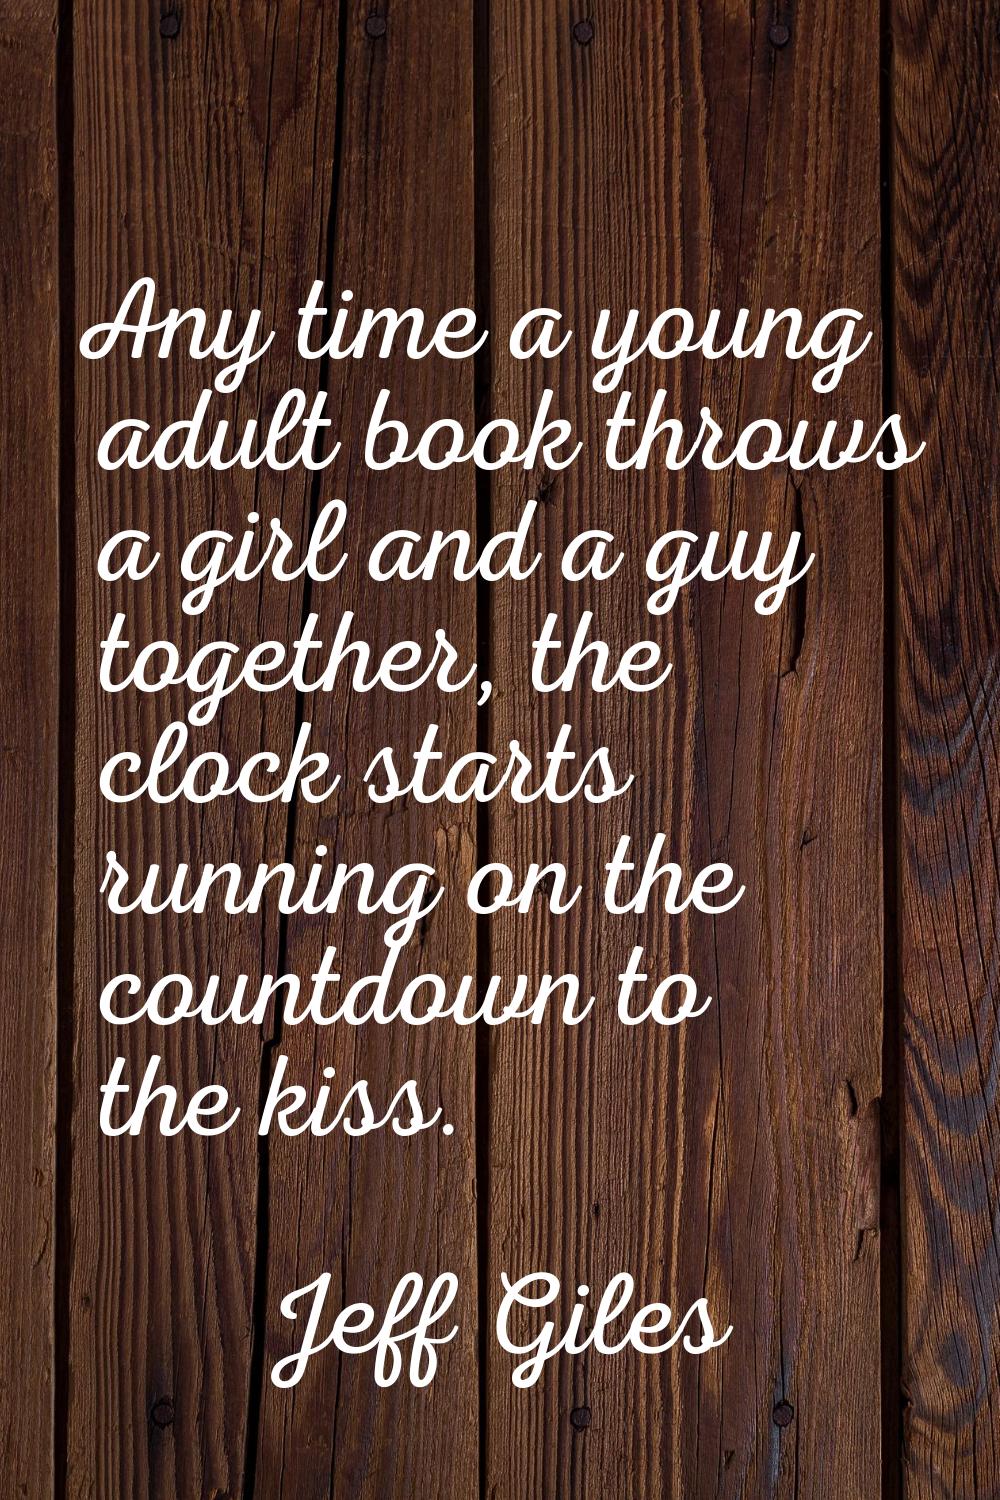 Any time a young adult book throws a girl and a guy together, the clock starts running on the count